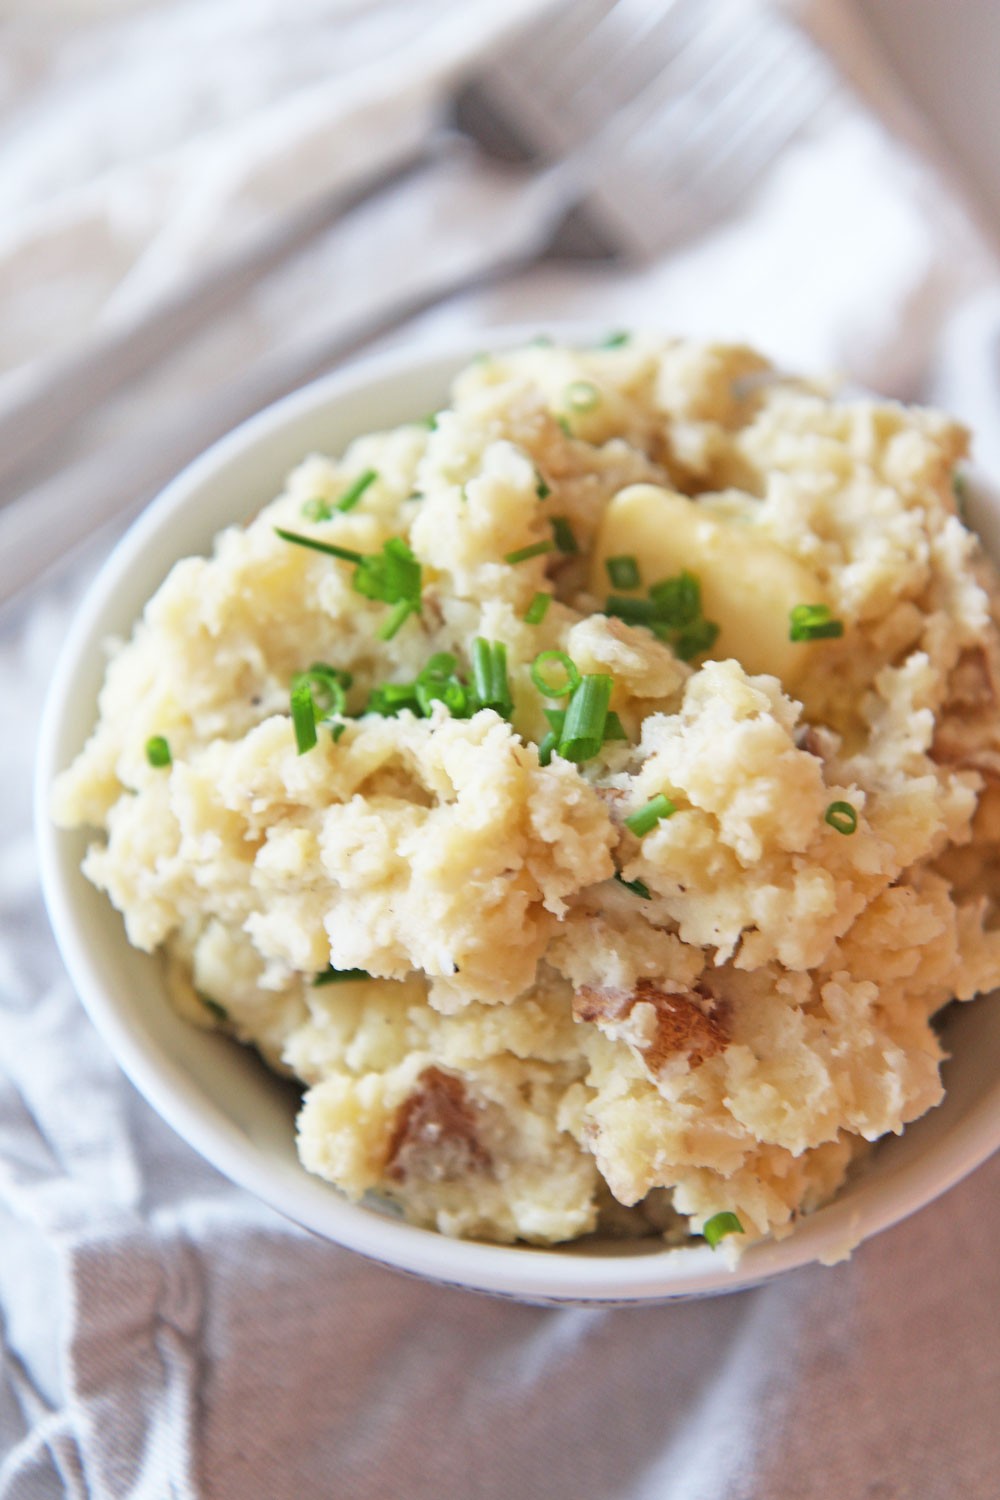 The Best Slow Cooker Mashed Potatoes Recipes. Easy buttery crock pot mashed potatoes makes it easy to cook for Thanksgiving, Christmas, Hanukkah, or Sunday Dinner. Happy Cooking! www.ChopHappy.com #mashedpotatoes #slowcookerecipes